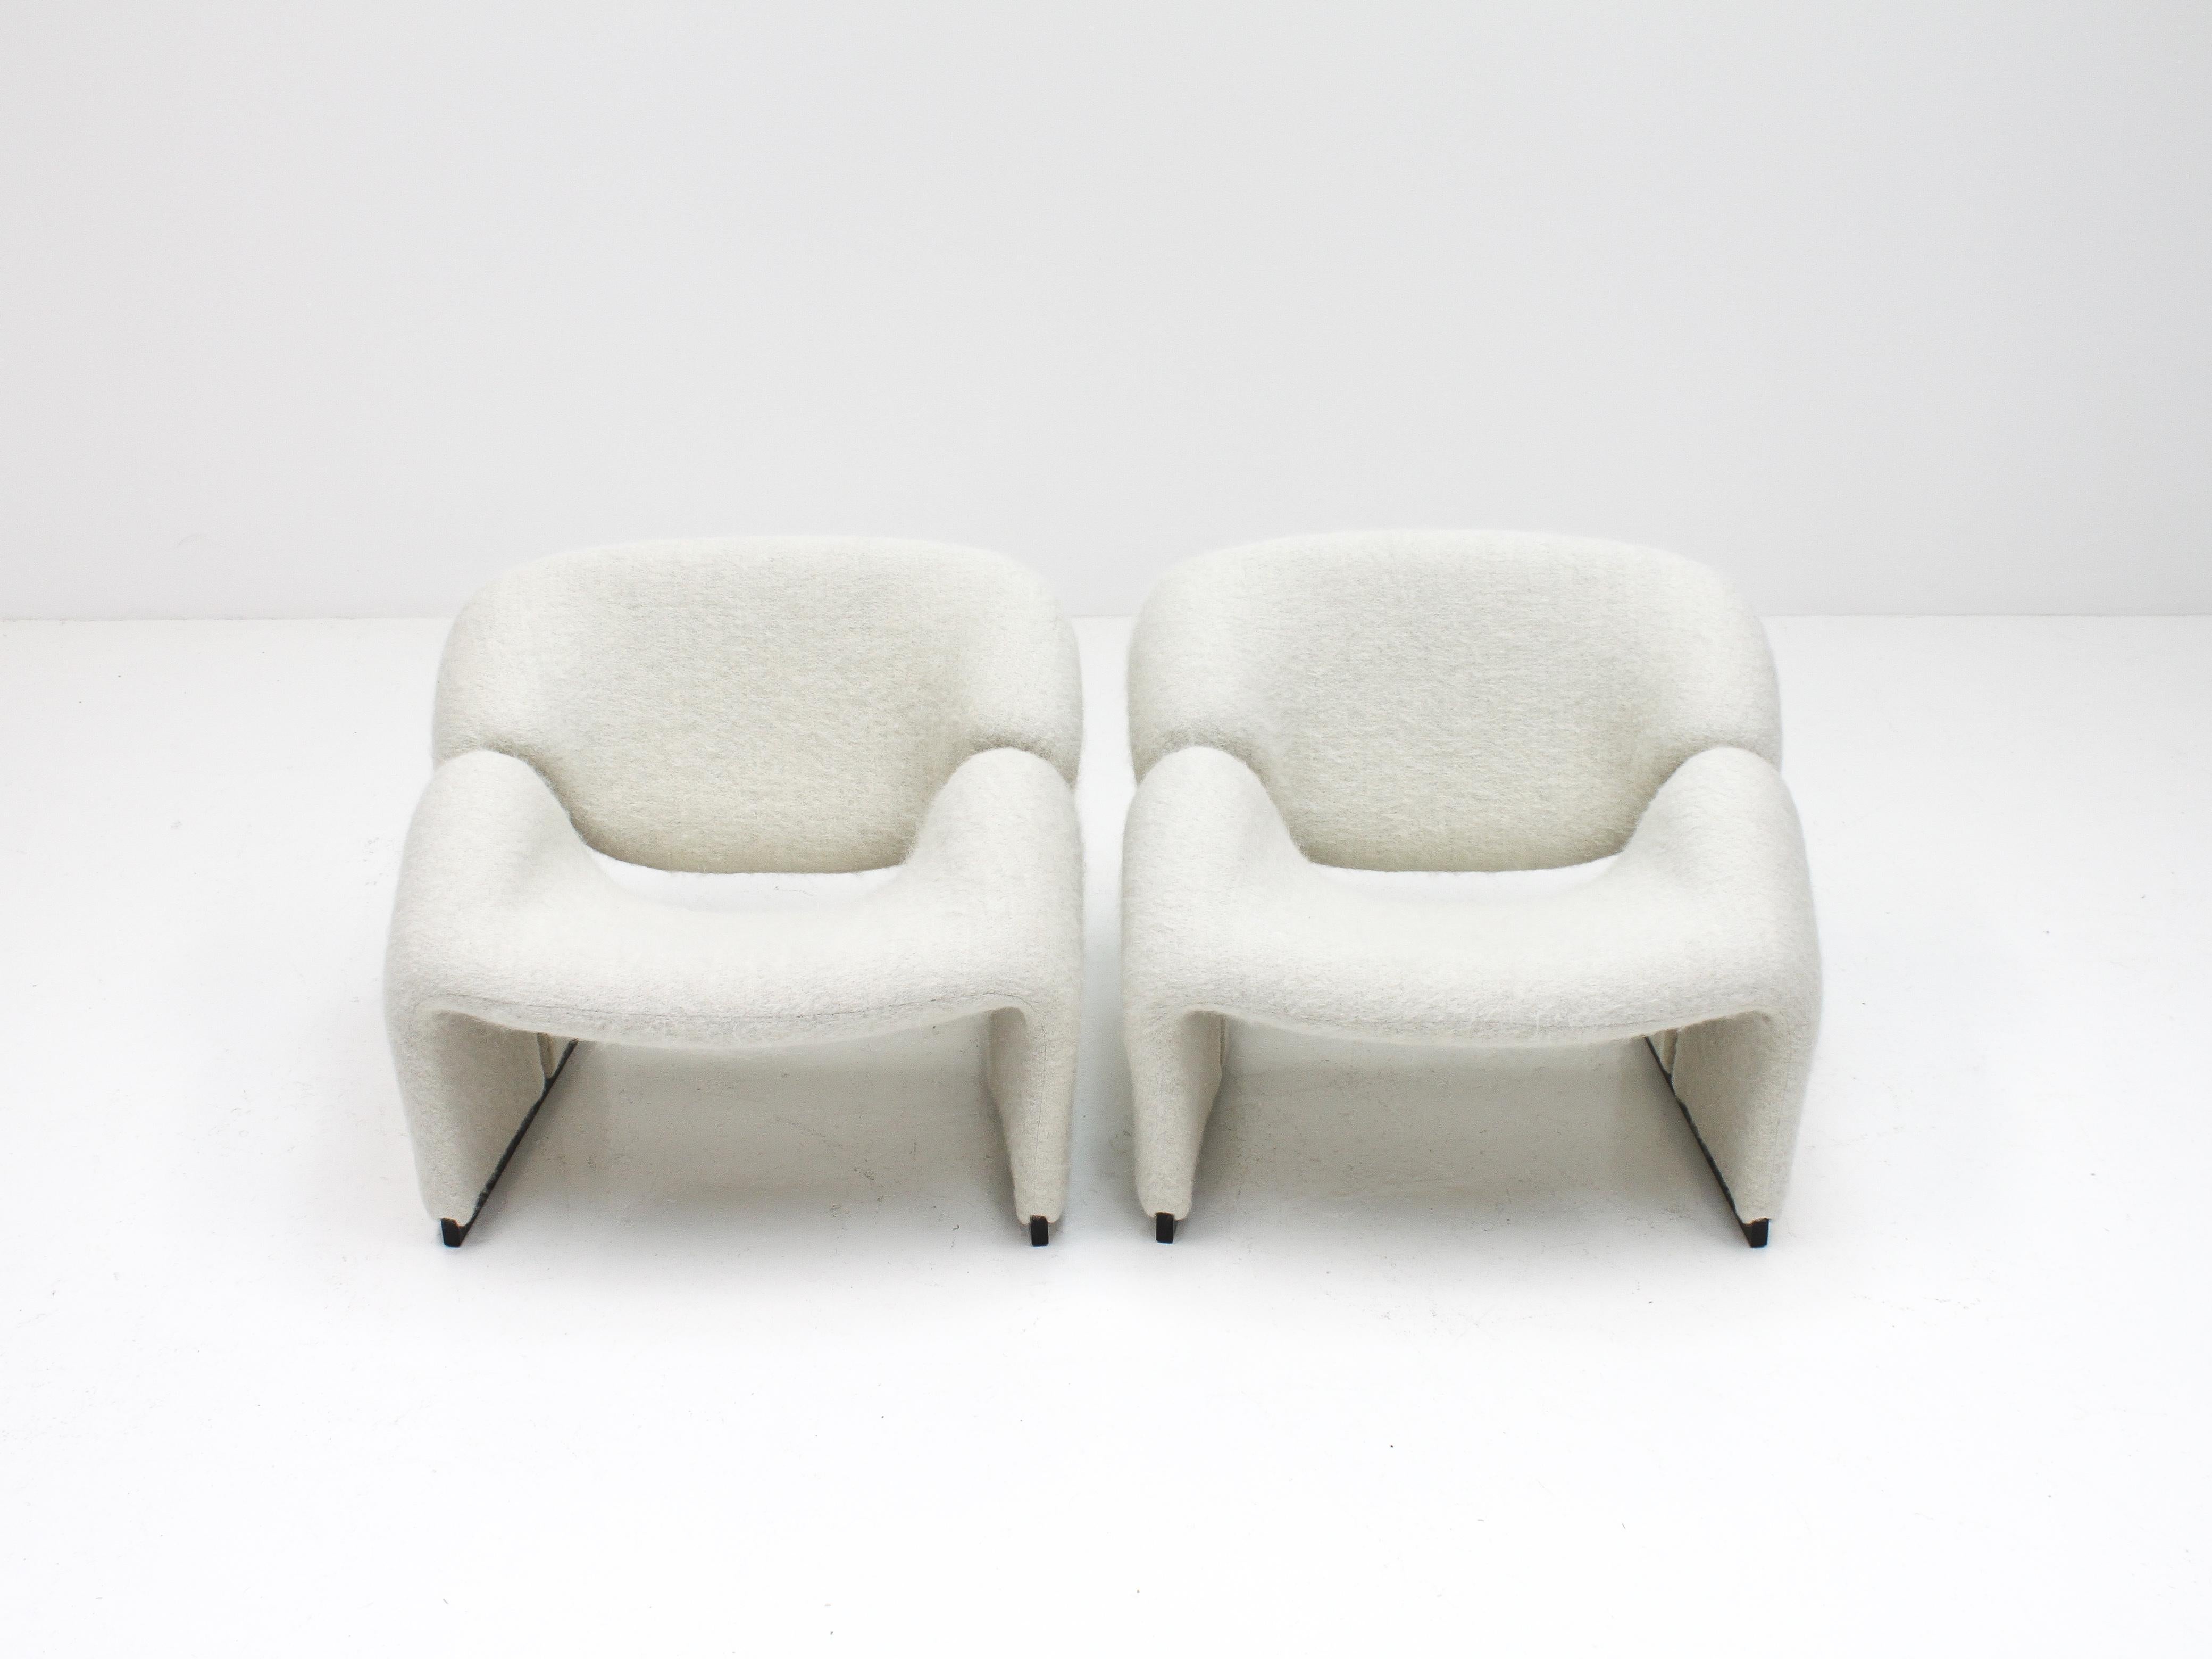 Pair of Pierre Paulin F580 1st Edition Groovy Chairs in Pierre Frey for Artifort 2